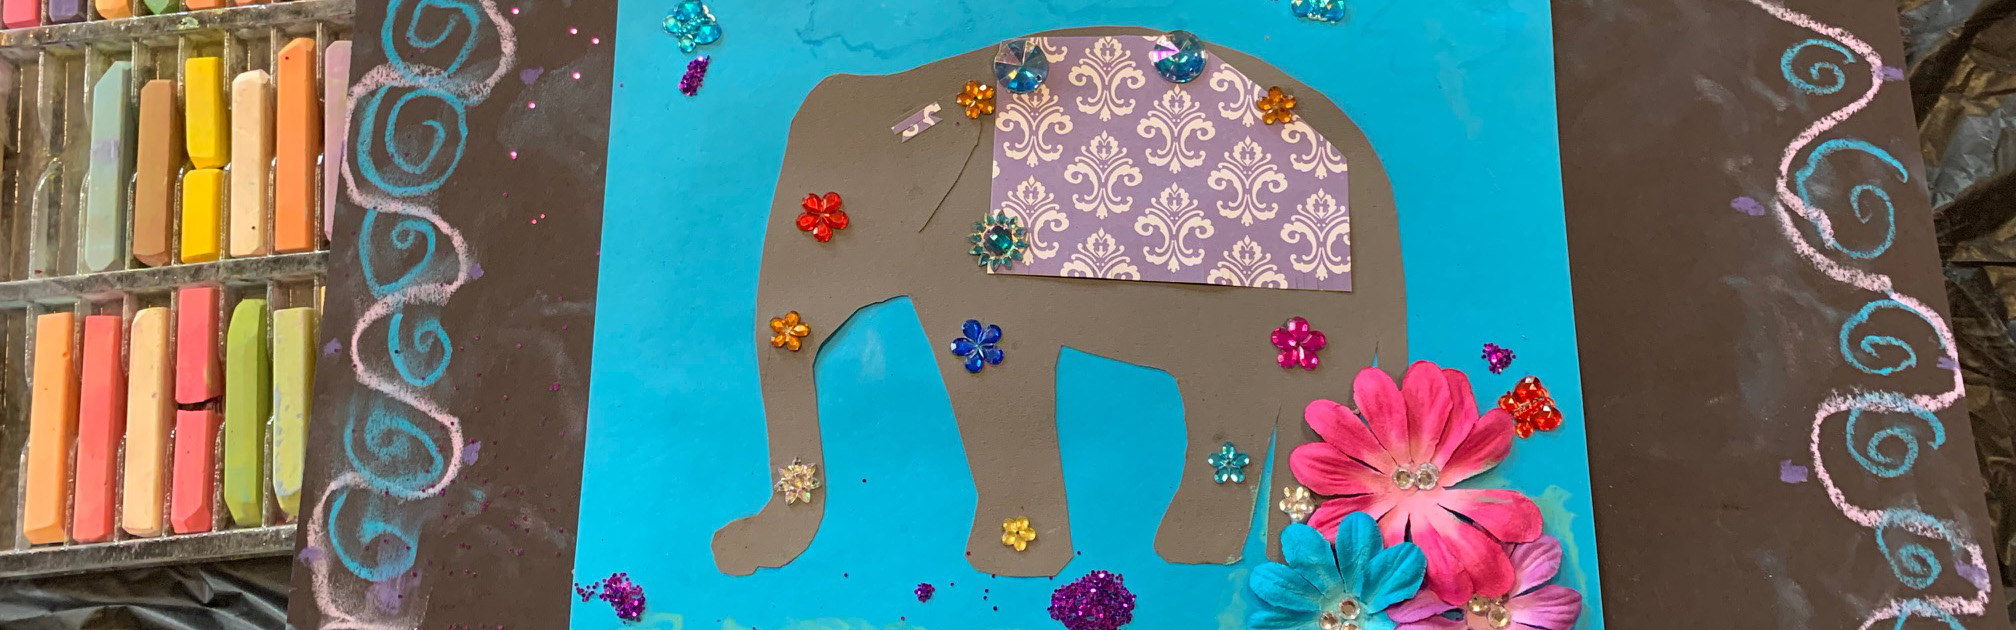 Collage featuring an elephant on bright blue paper surrounded by art supplies